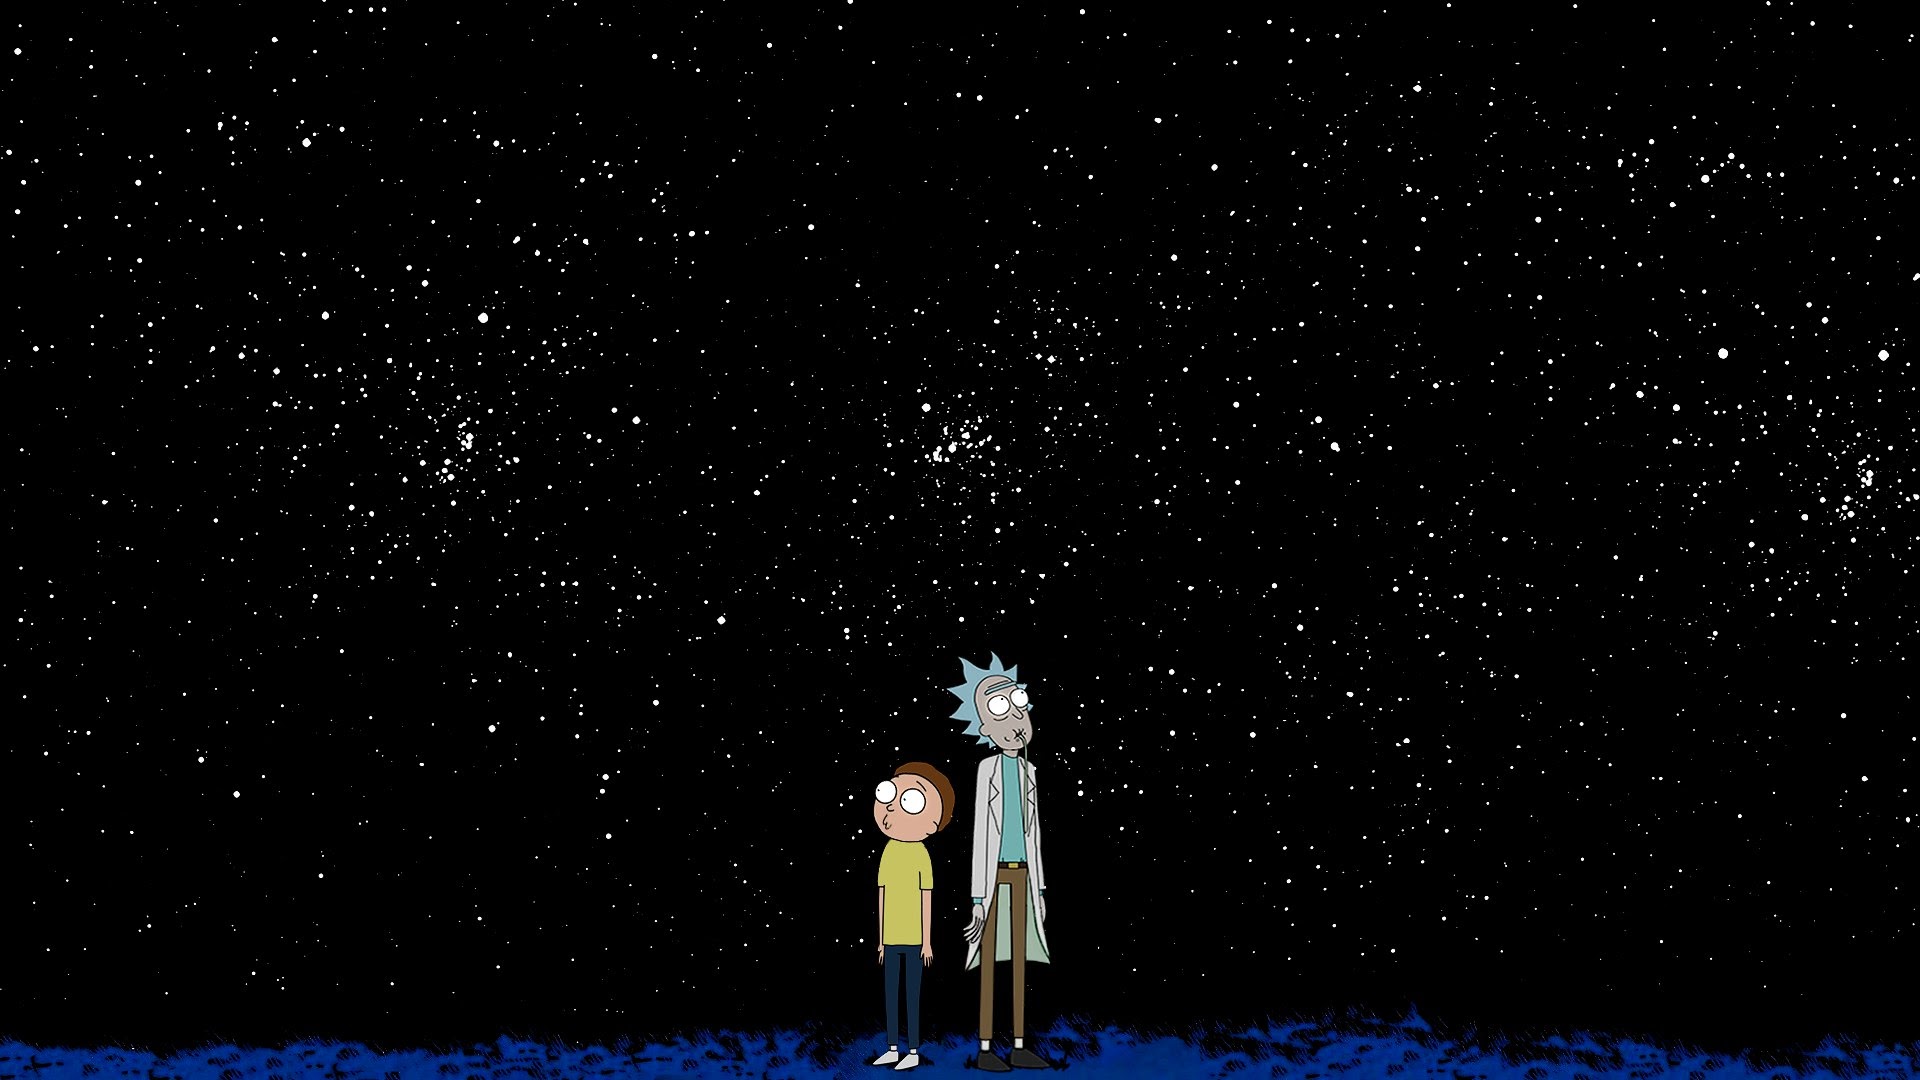 Wallpapers Rick Morty animated TV series on the desktop